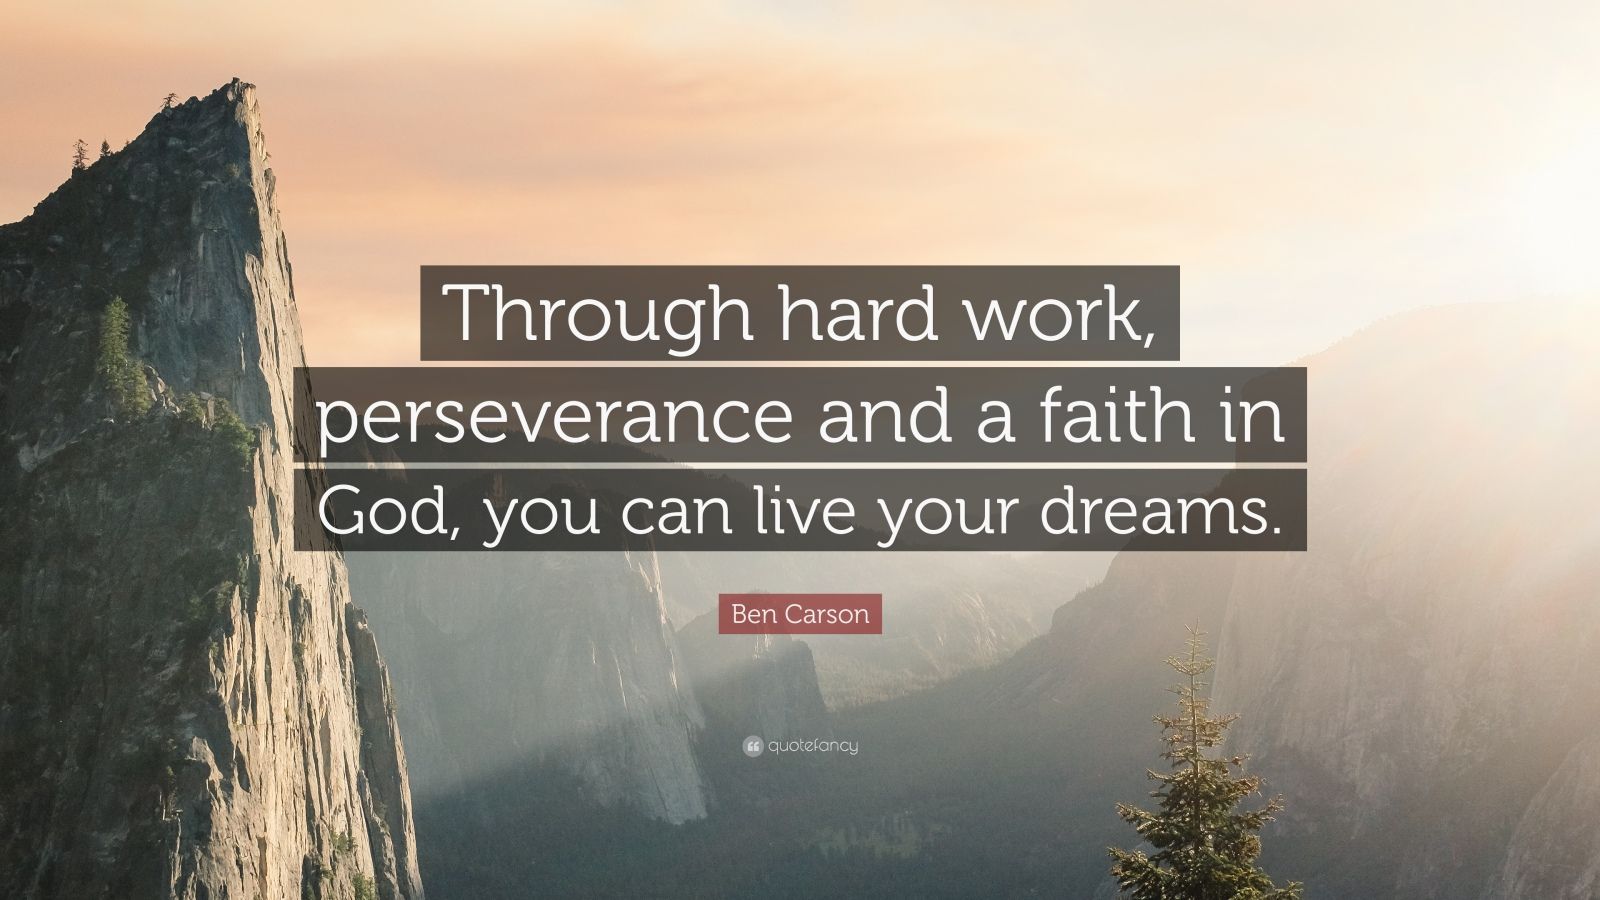 Ben Carson Quote: “Through hard work, perseverance and a faith in God